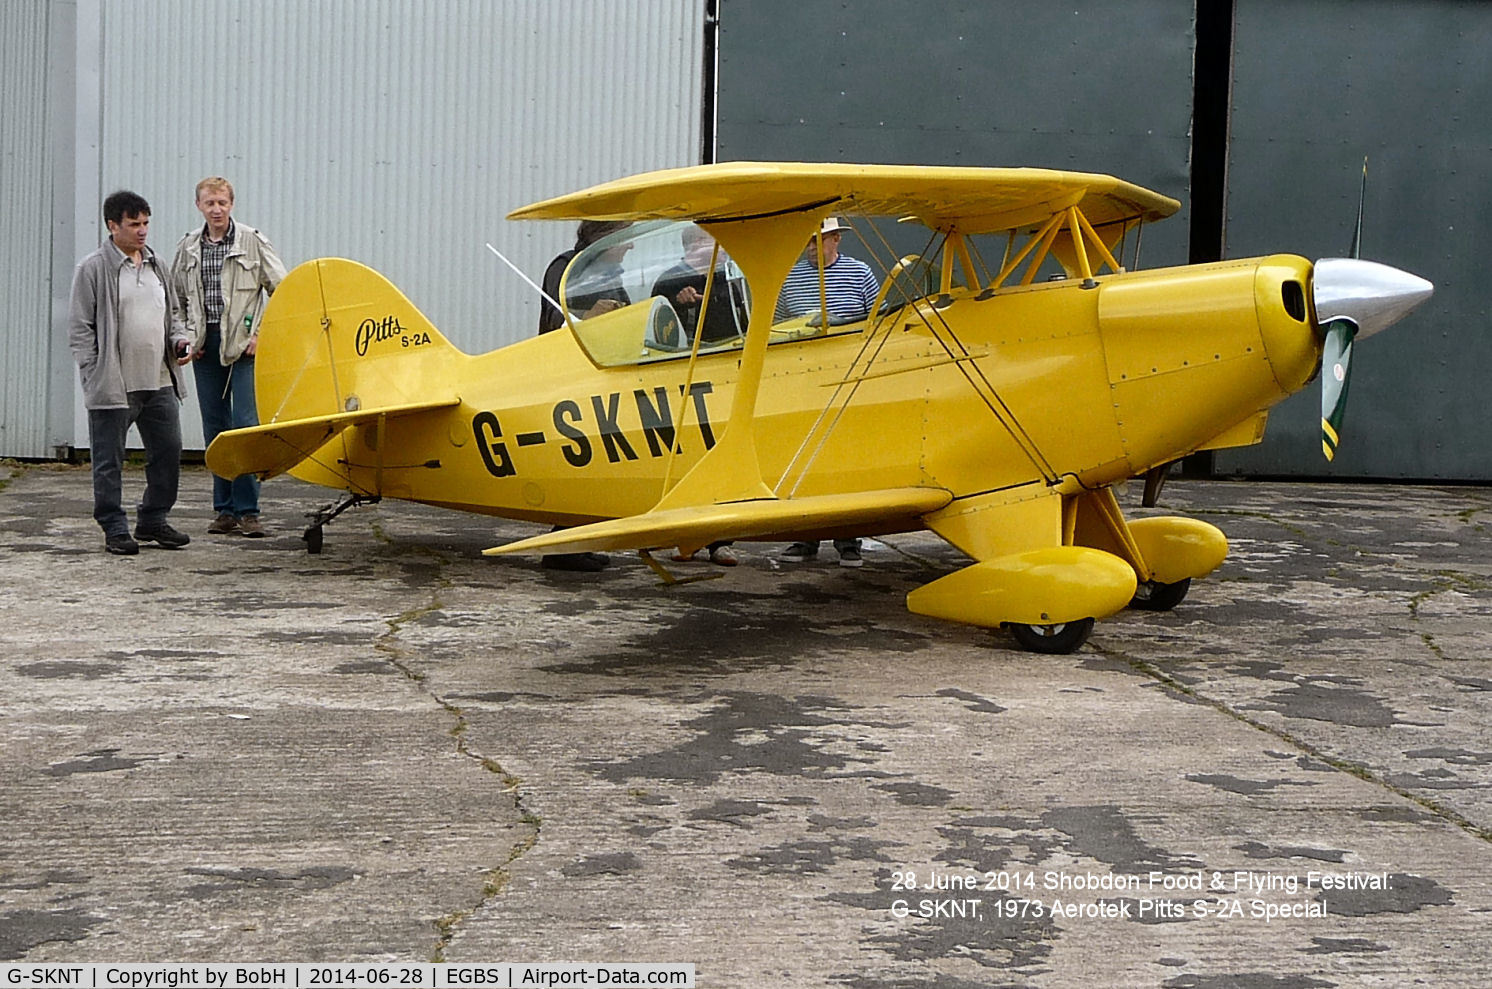 G-SKNT, 1973 Aerotek Pitts S-2A Special C/N 2048, Taken at the Shobdon Food & Flying Festival on 28th June 2014.